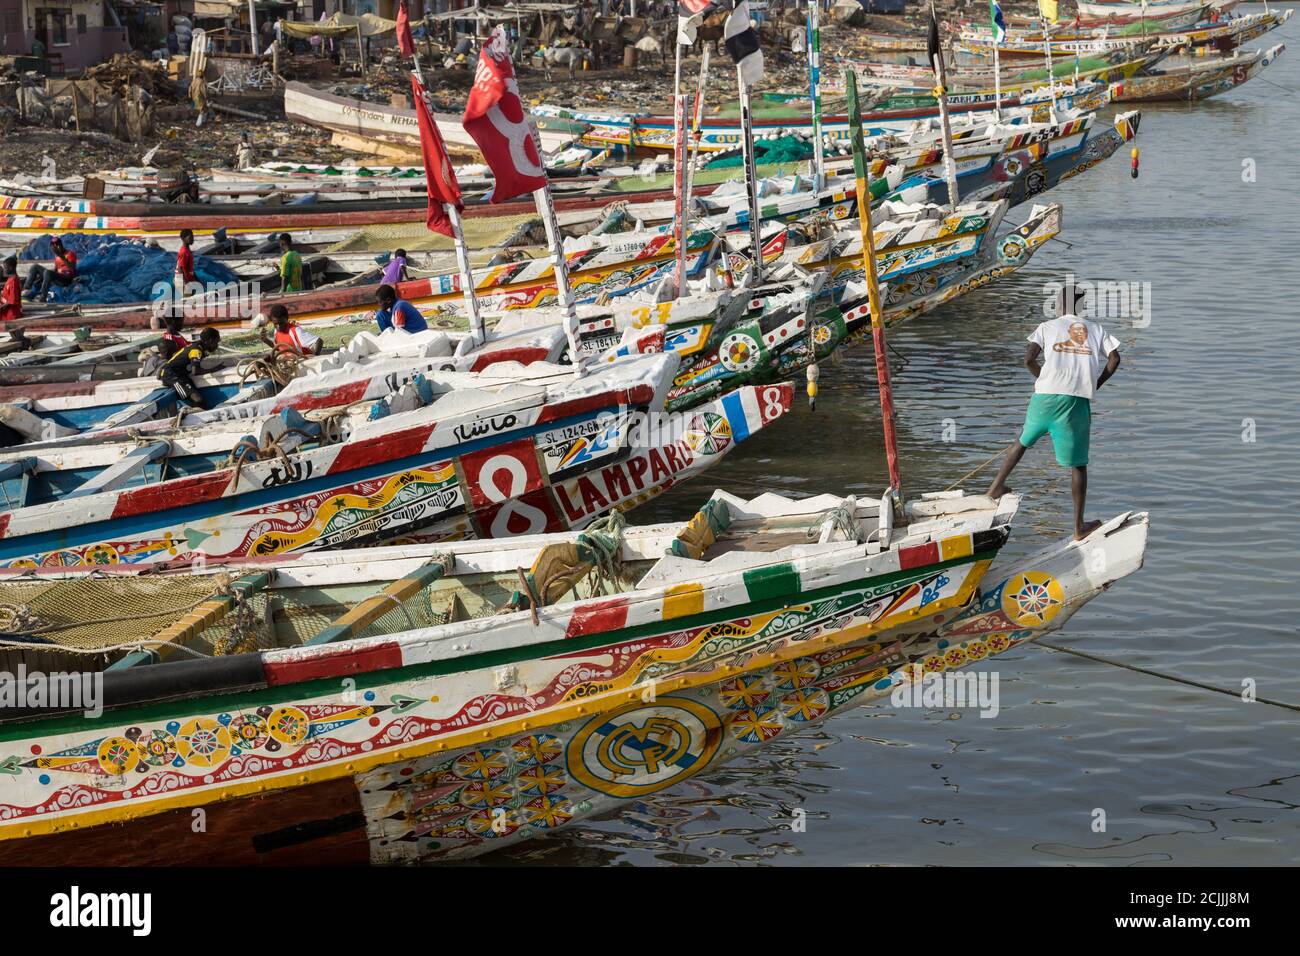 Boats and pirogues on the Senegal River at St Louis, Senegal Stock Photo